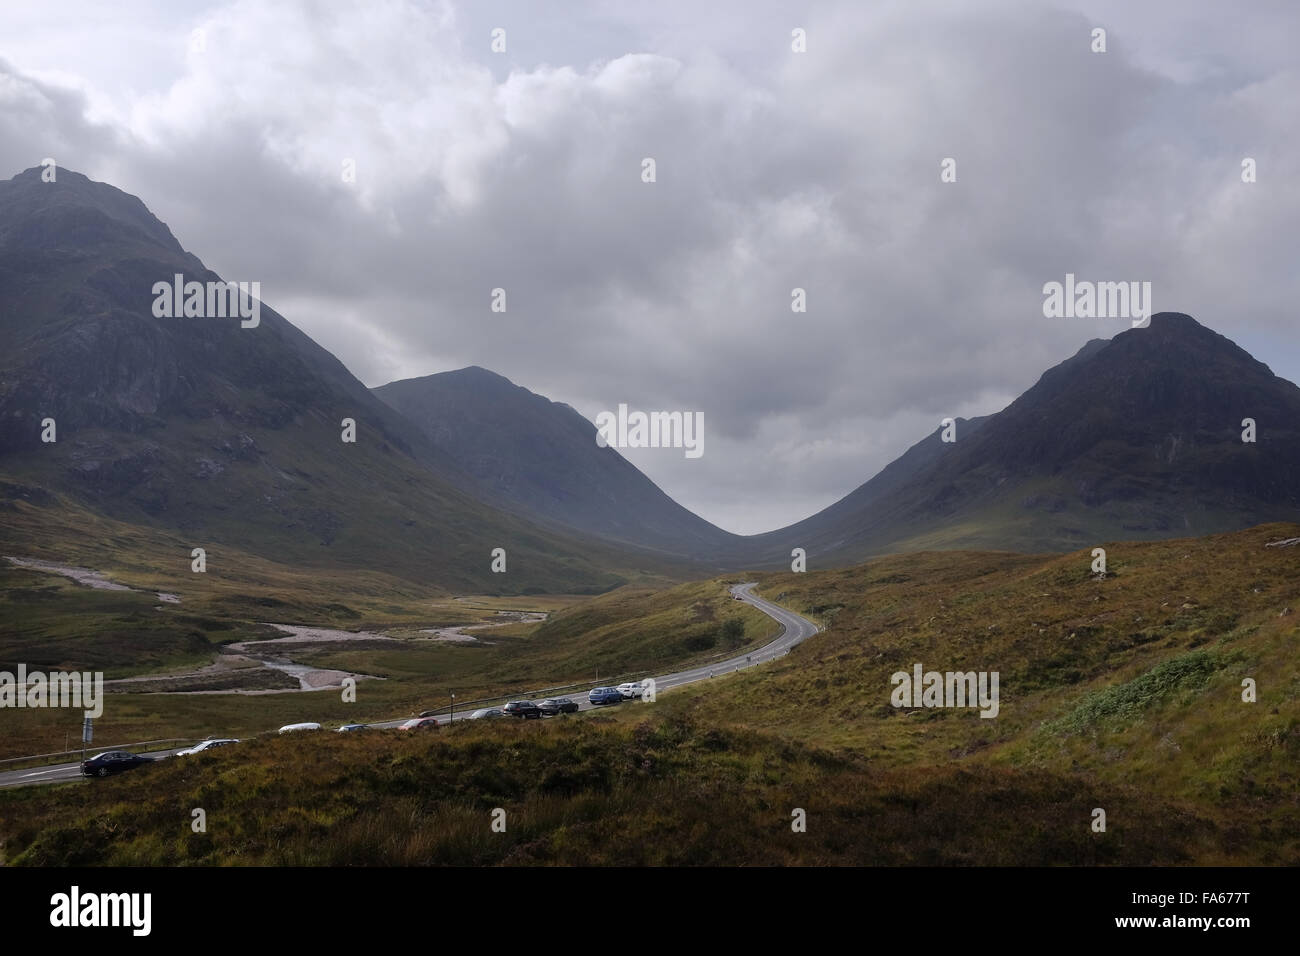 Row of Cars parked on road, Highlands, Scotland, United Kingdom Stock Photo